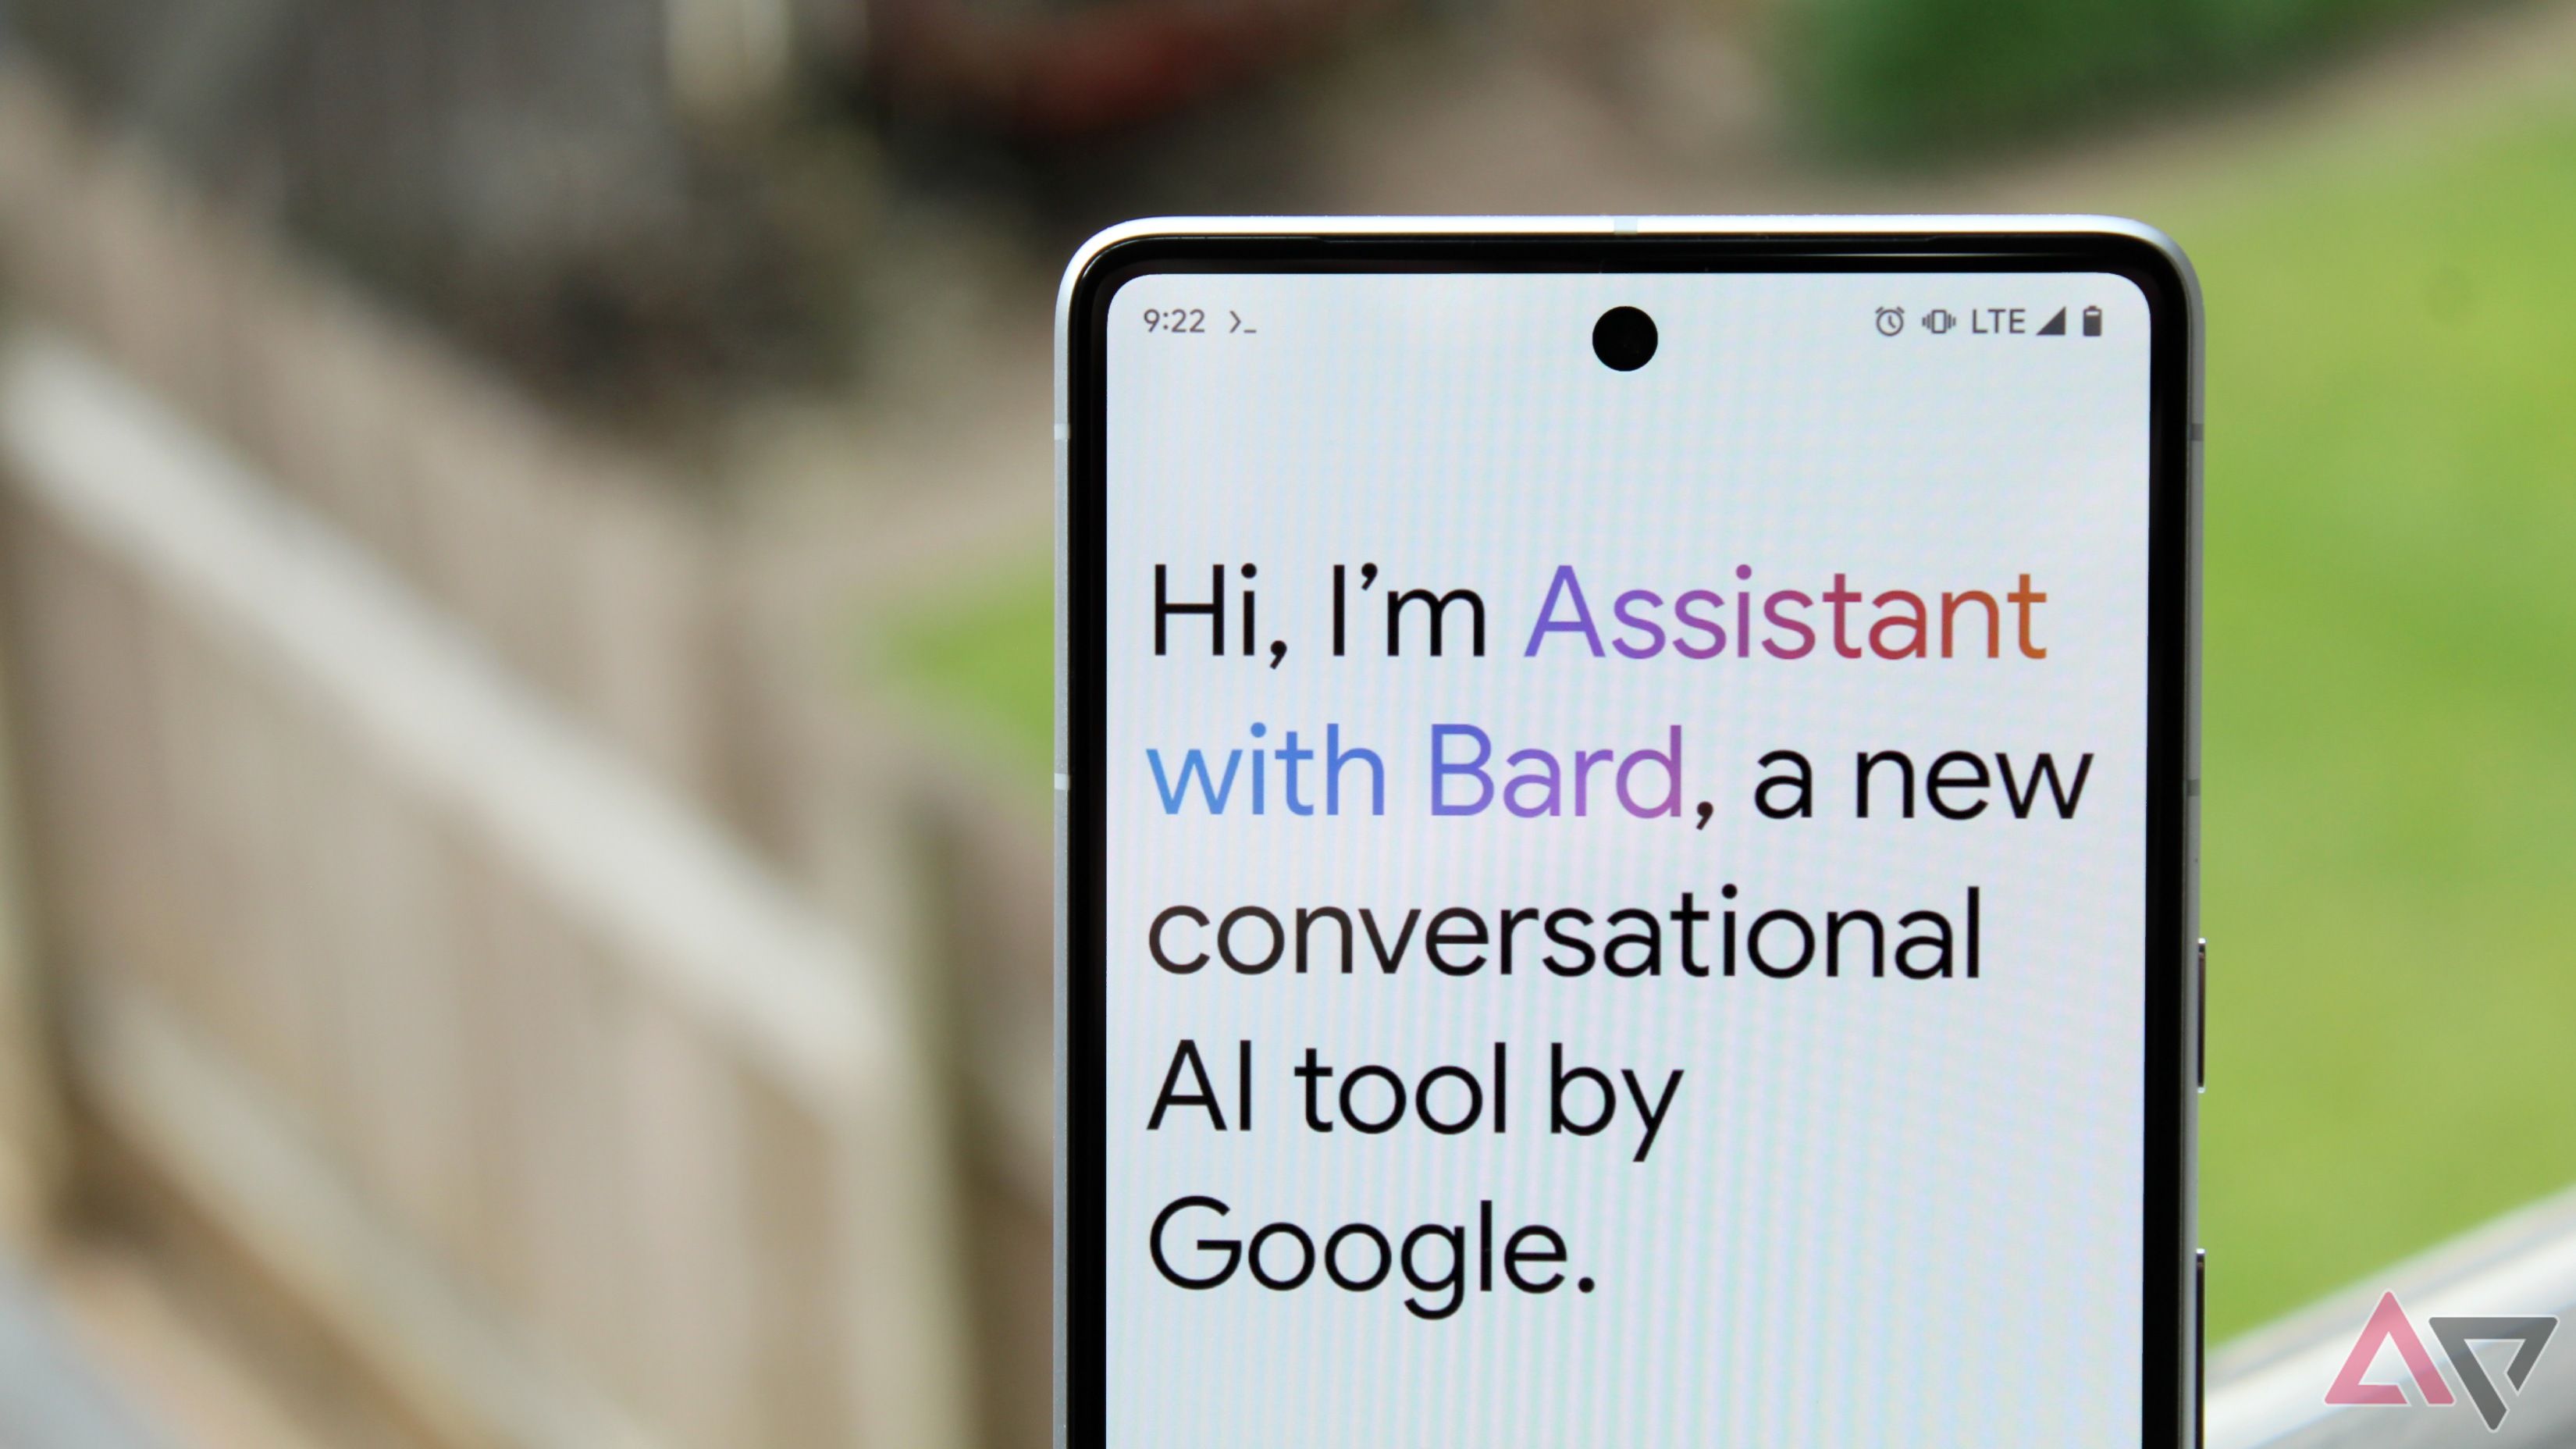 Google Assistant using Bard on a phone.